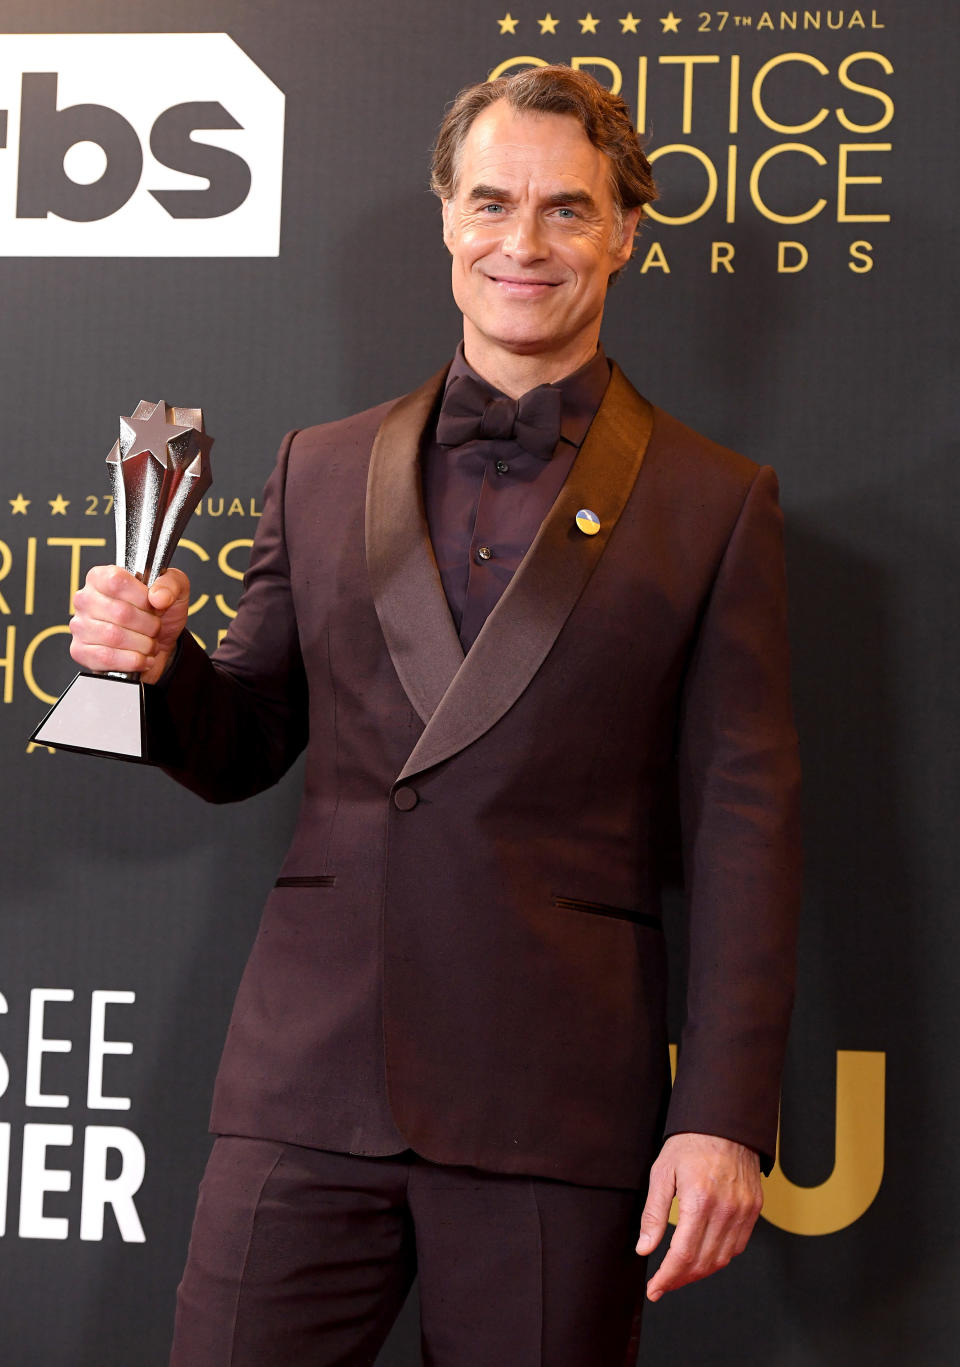 Murray Bartlett poses at the 27th Annual Critics Choice Awards in 2022